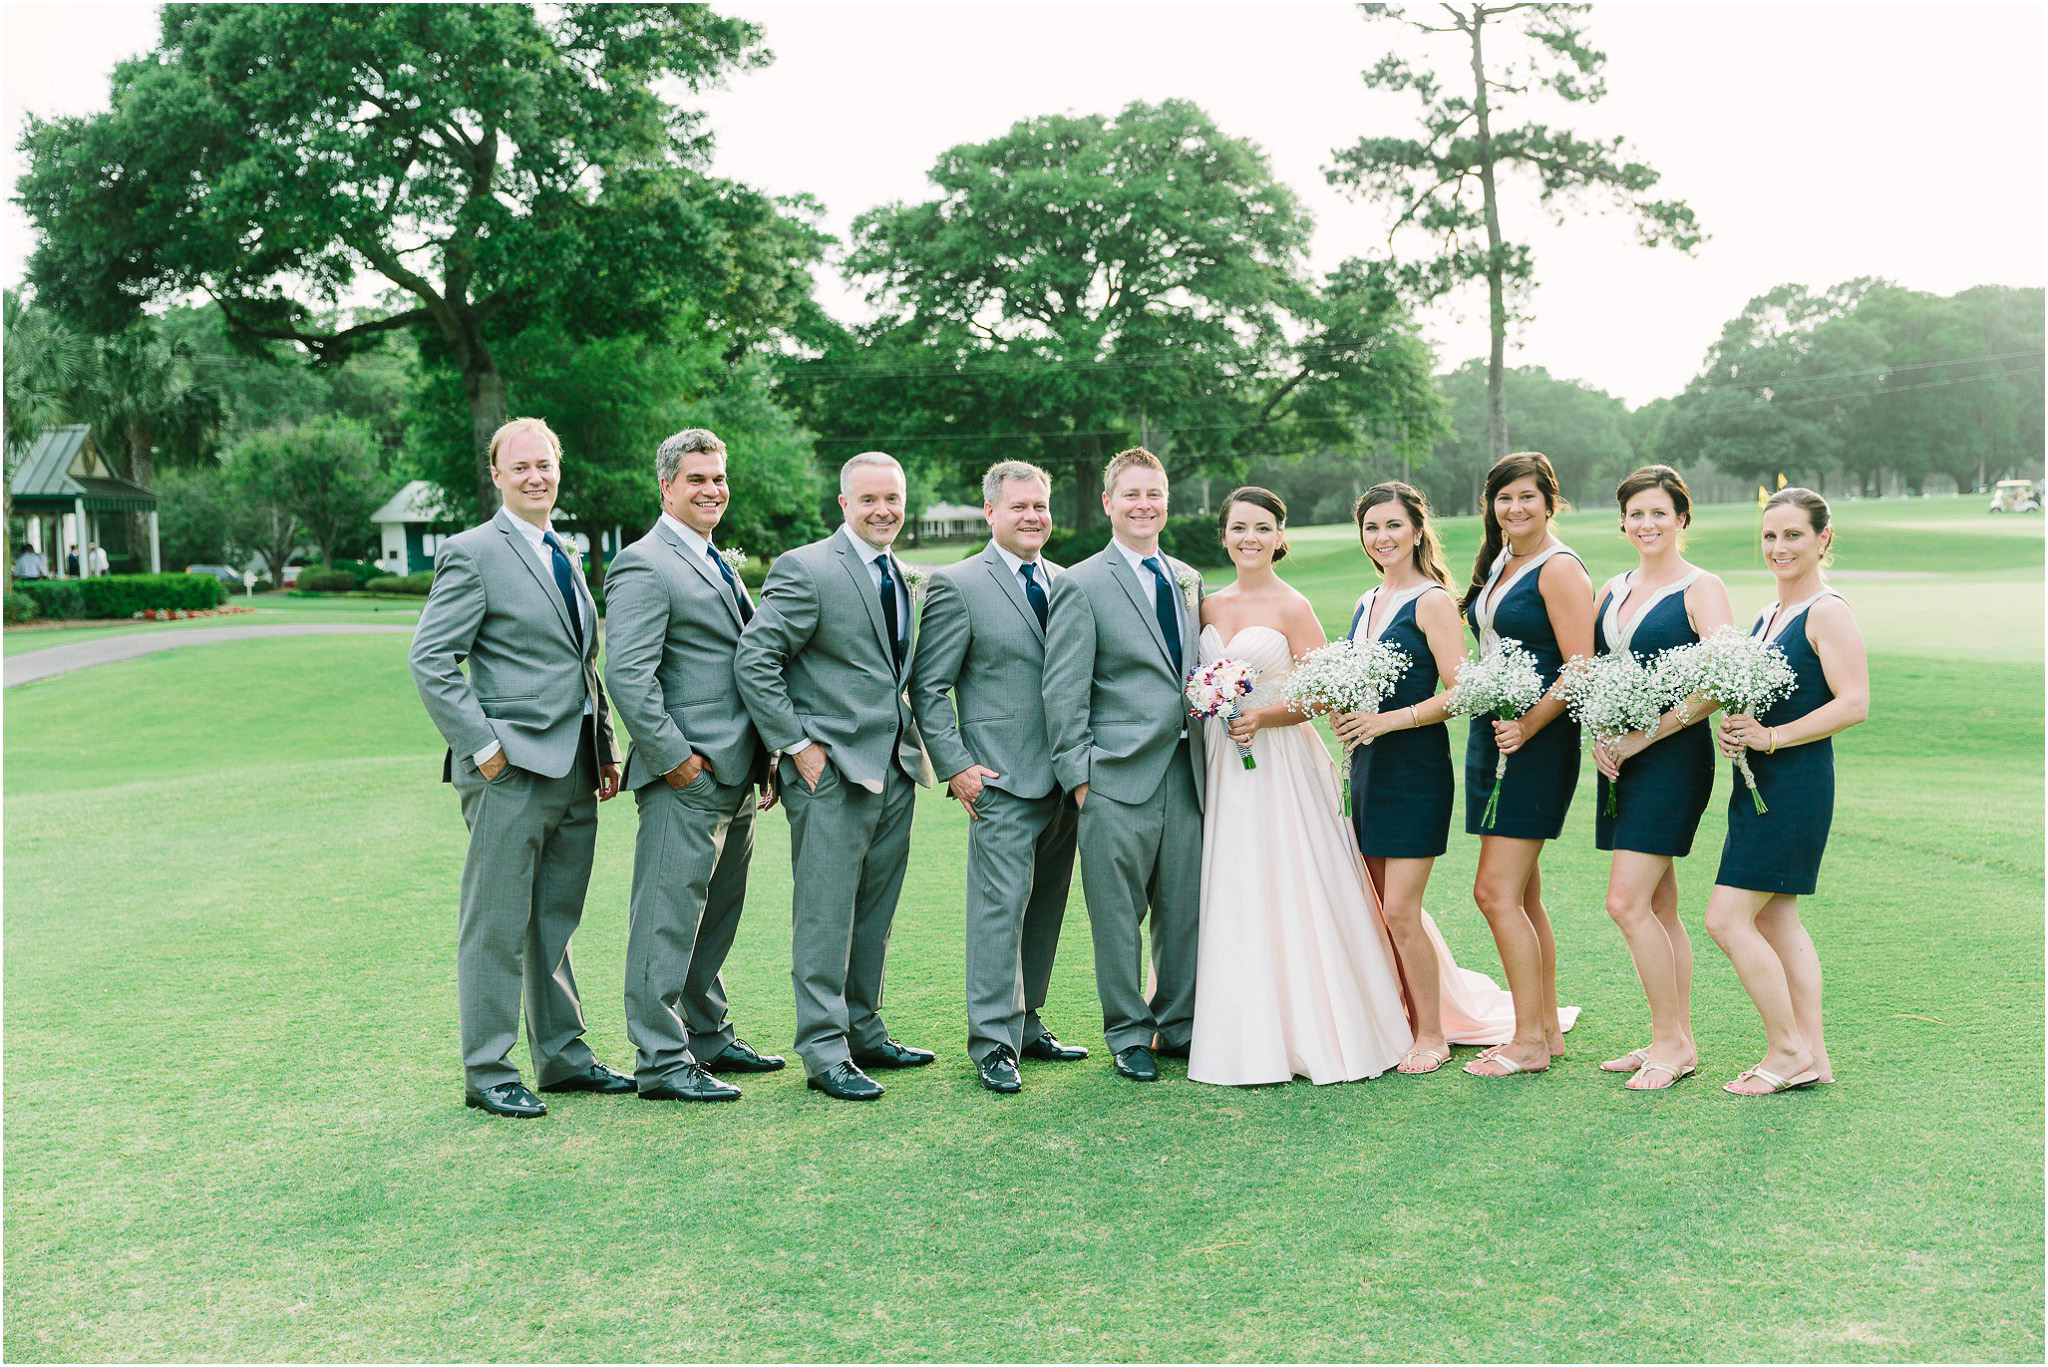 Bridal Party portrait on the green